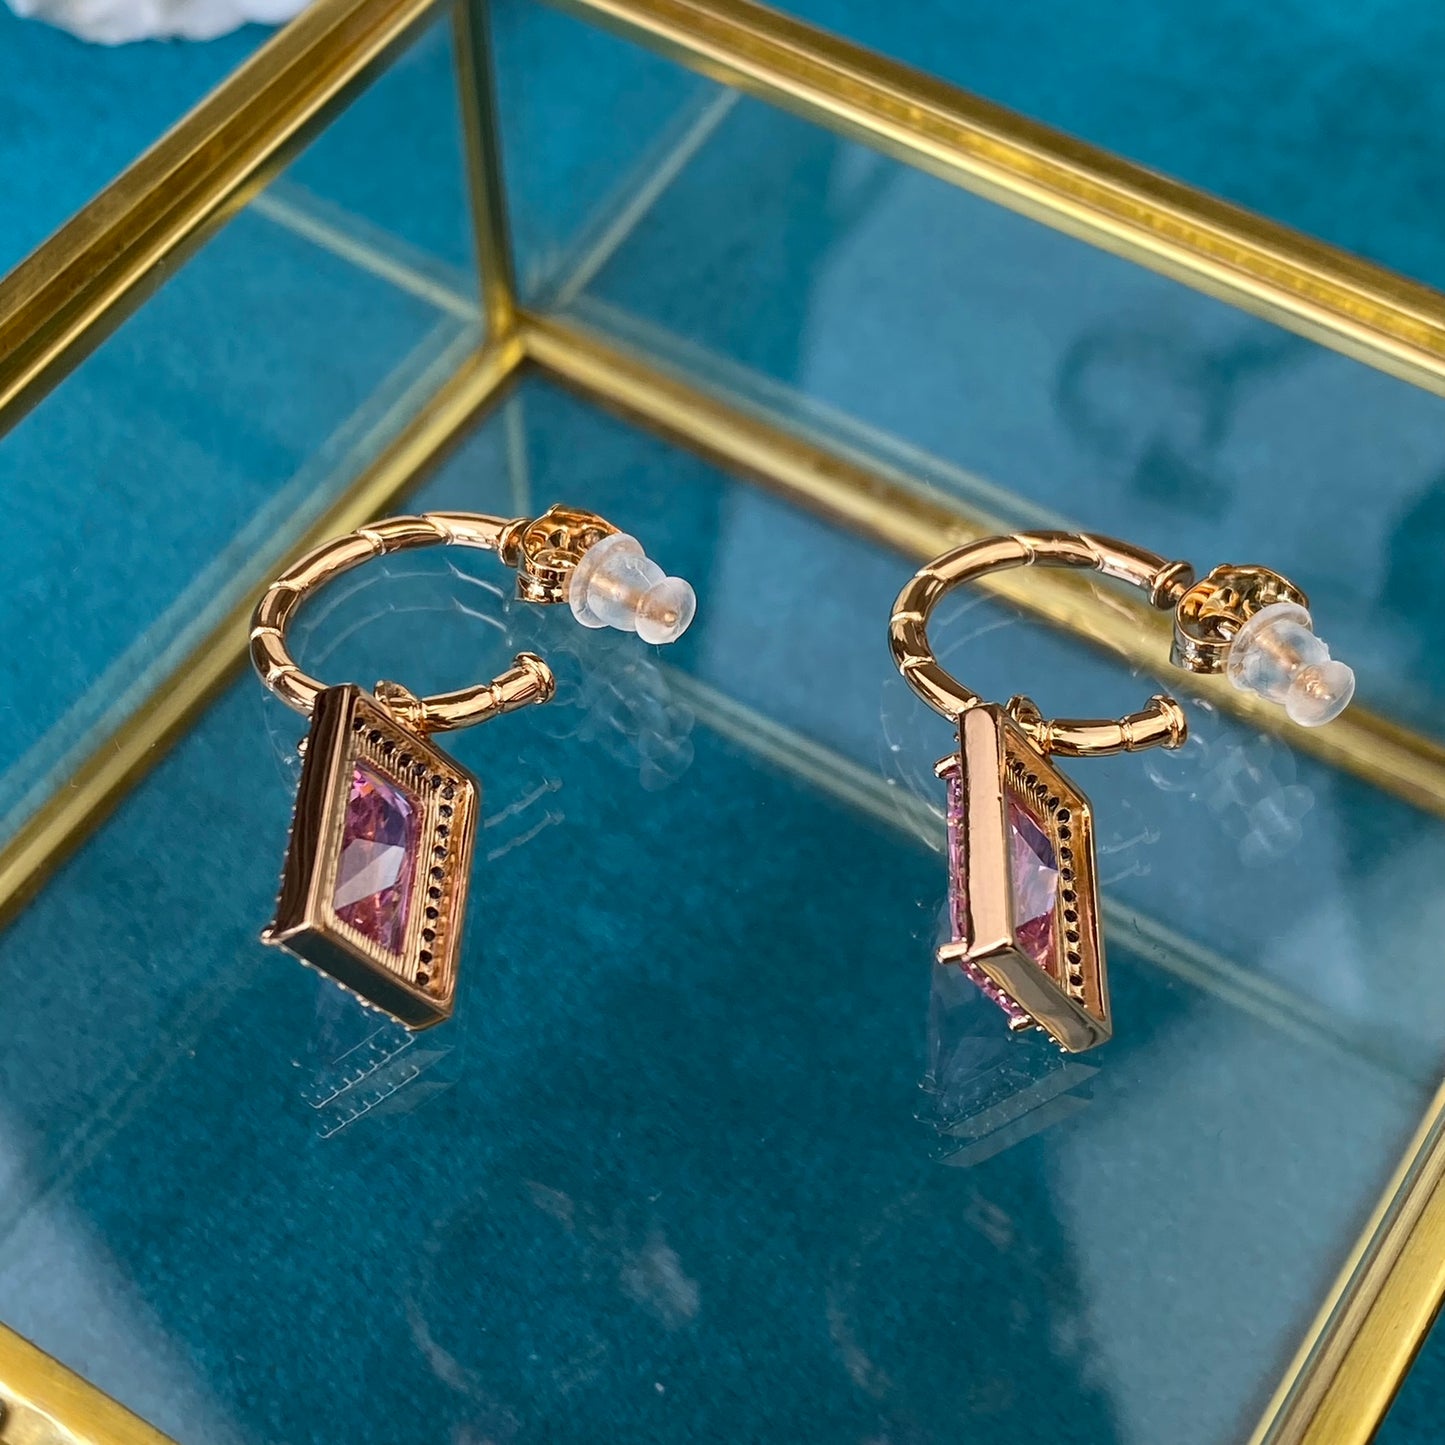 Gold Plated Stainless Steel Earrings with pink decorative crystal